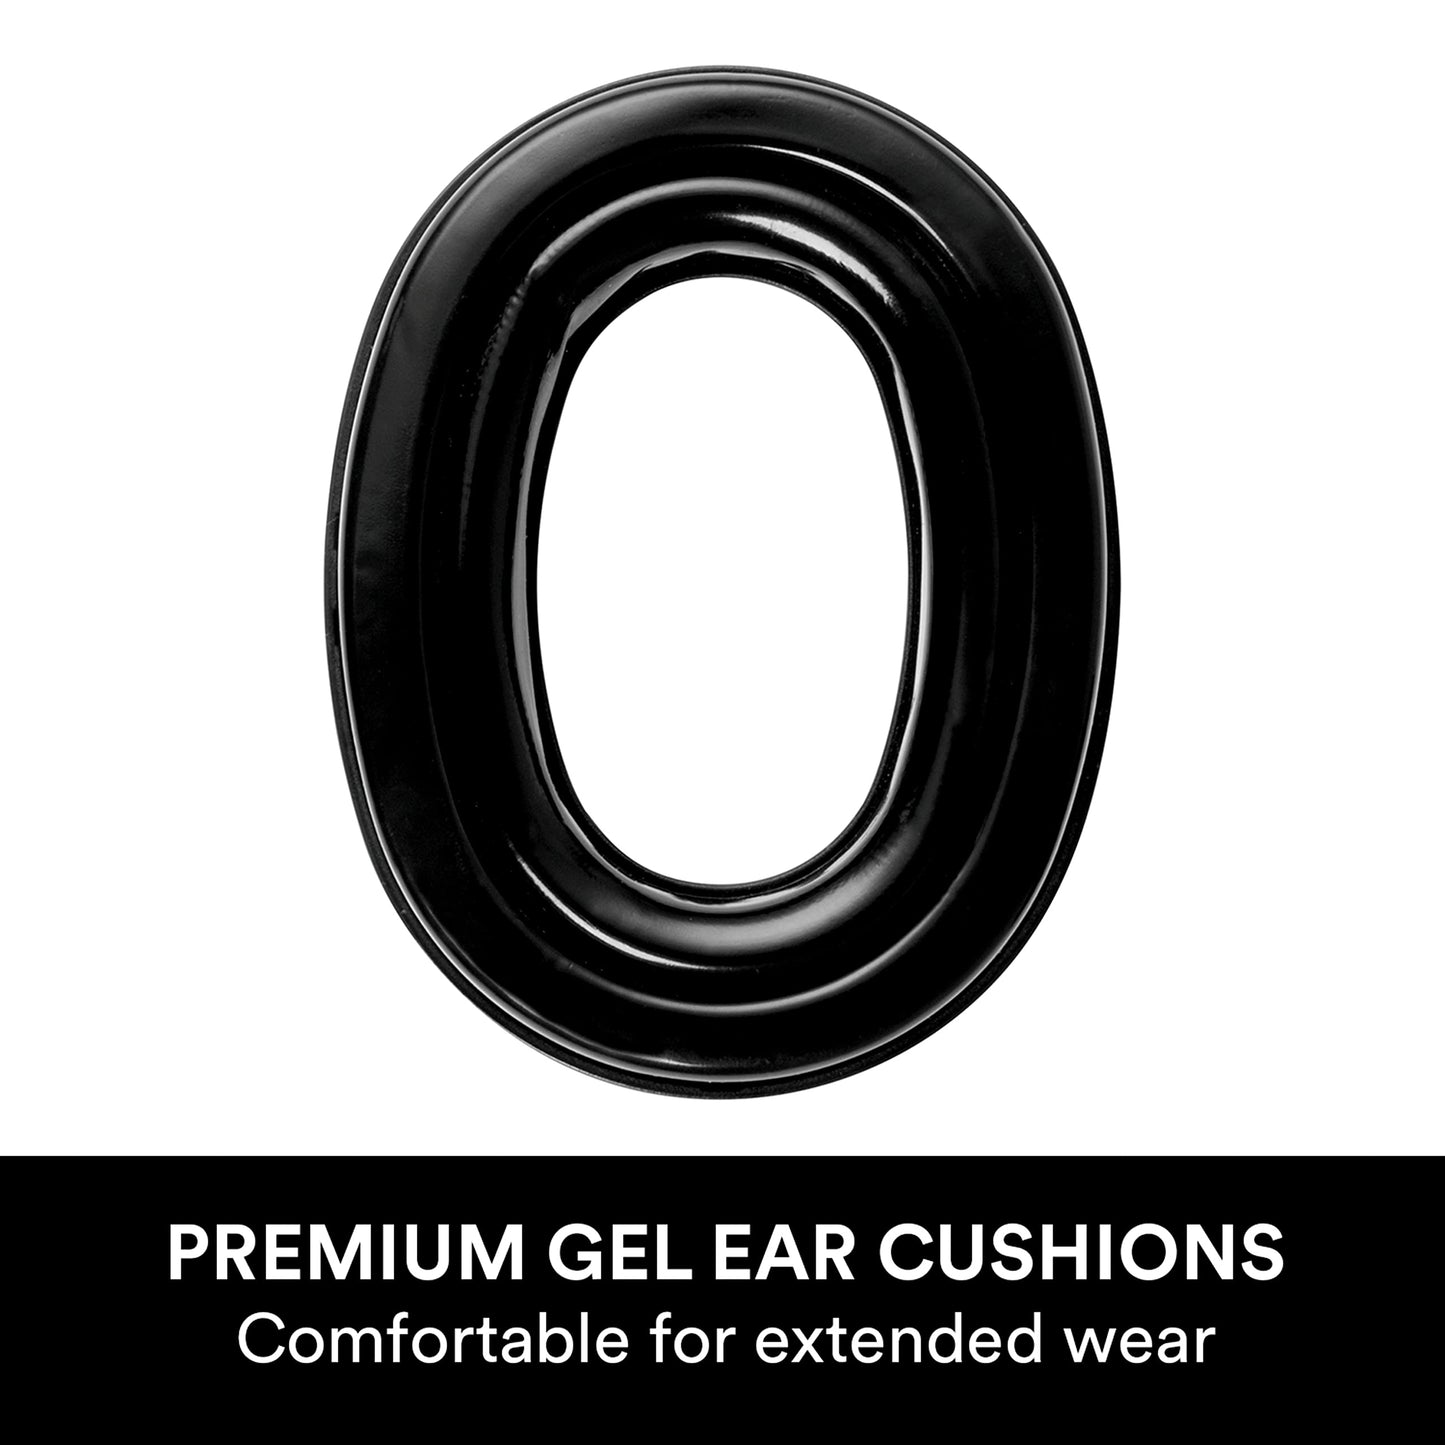 3M WorkTunes Connect + Gel Ear Cushions Hearing Protector with Bluetooth Wireless Technology, NRR 23 dB, Hearing protection for Mowing, Snowblowing,